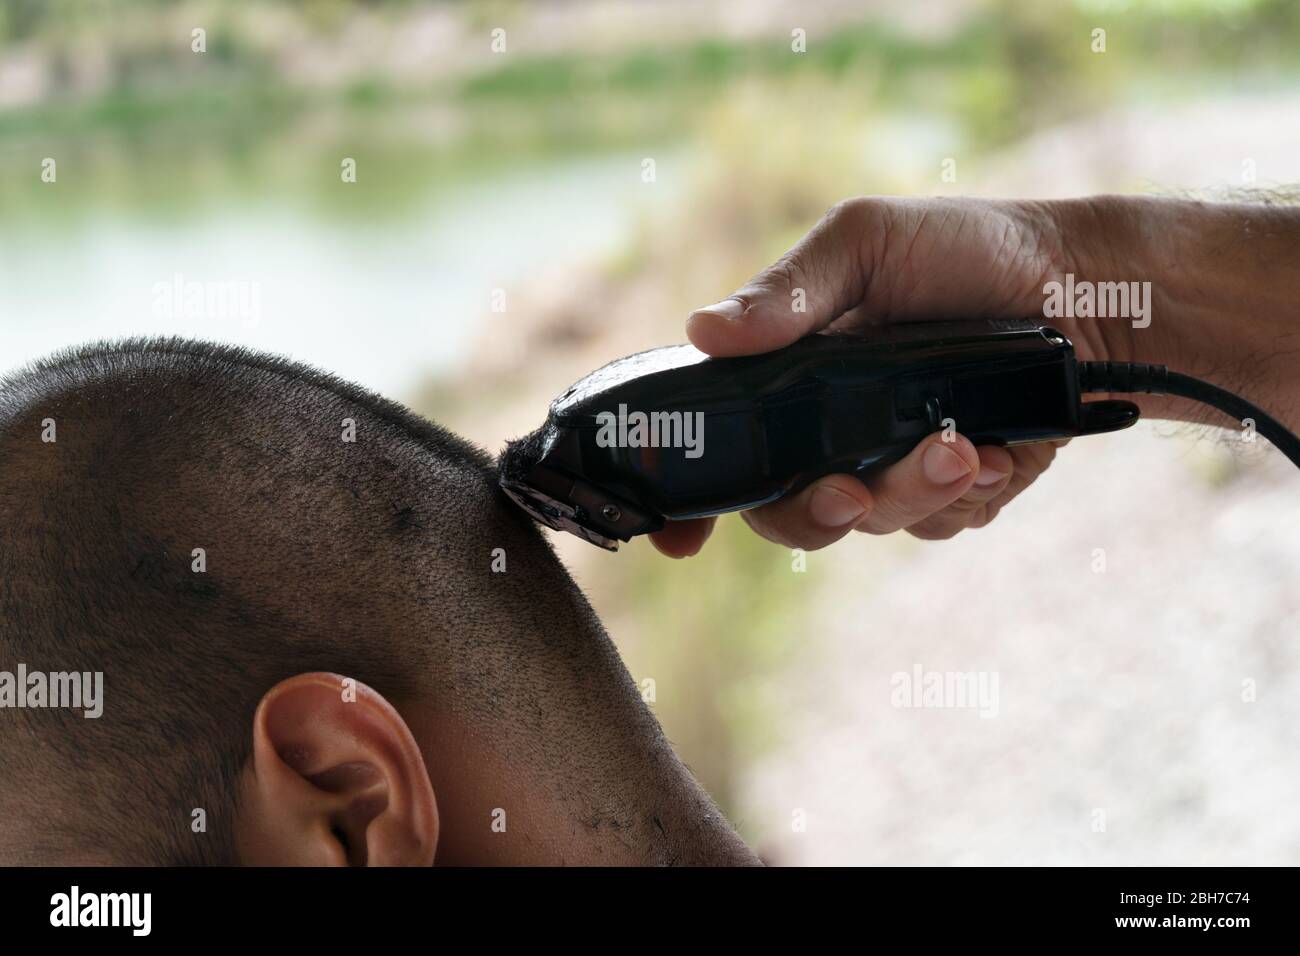 close up man hand with clipper for hair cutting at home during disease quarantine period Stock Photo